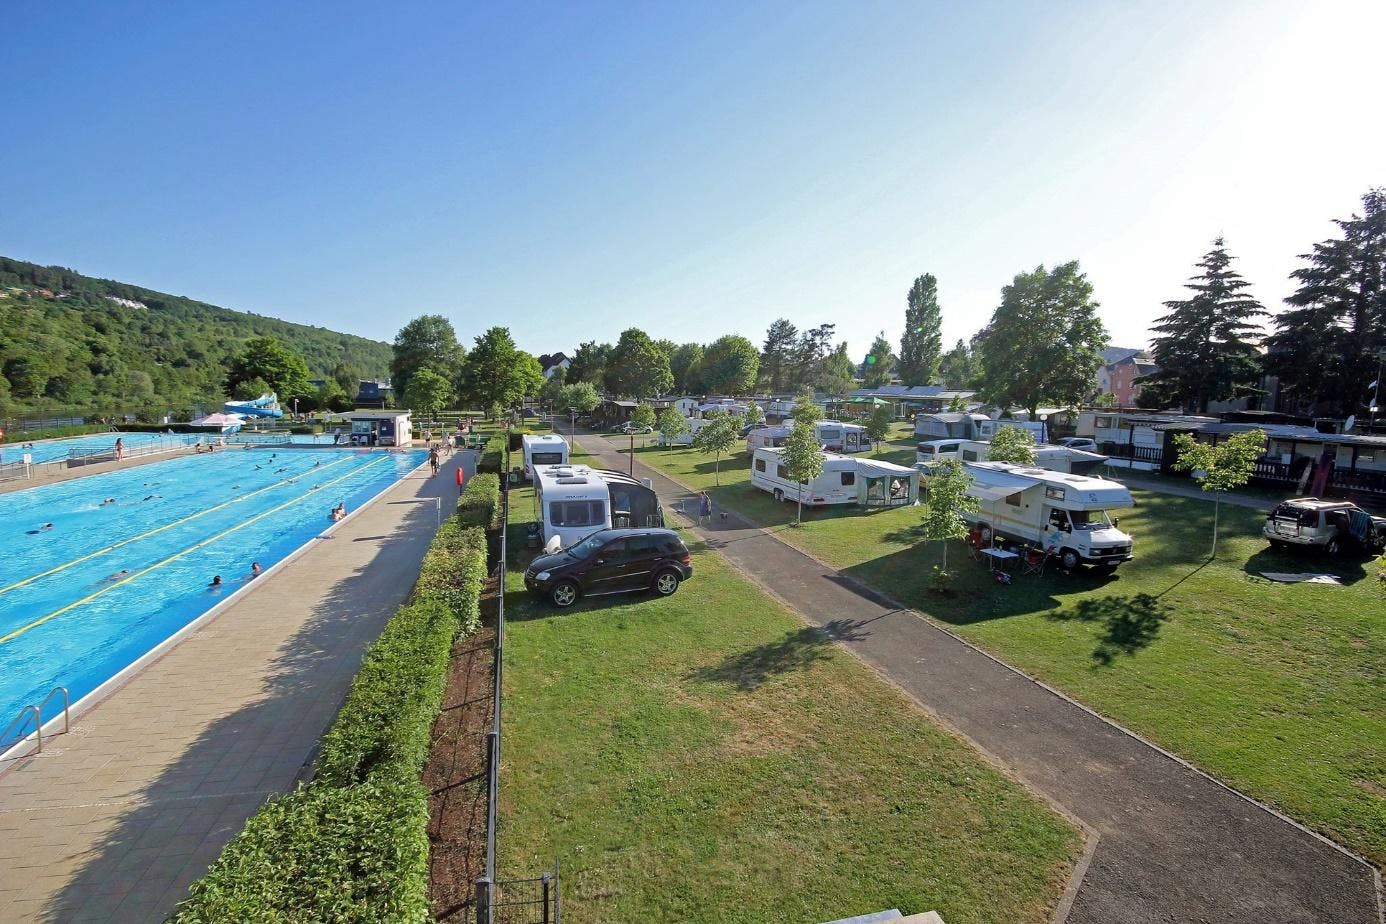 Grevenmacher camping Facebook page